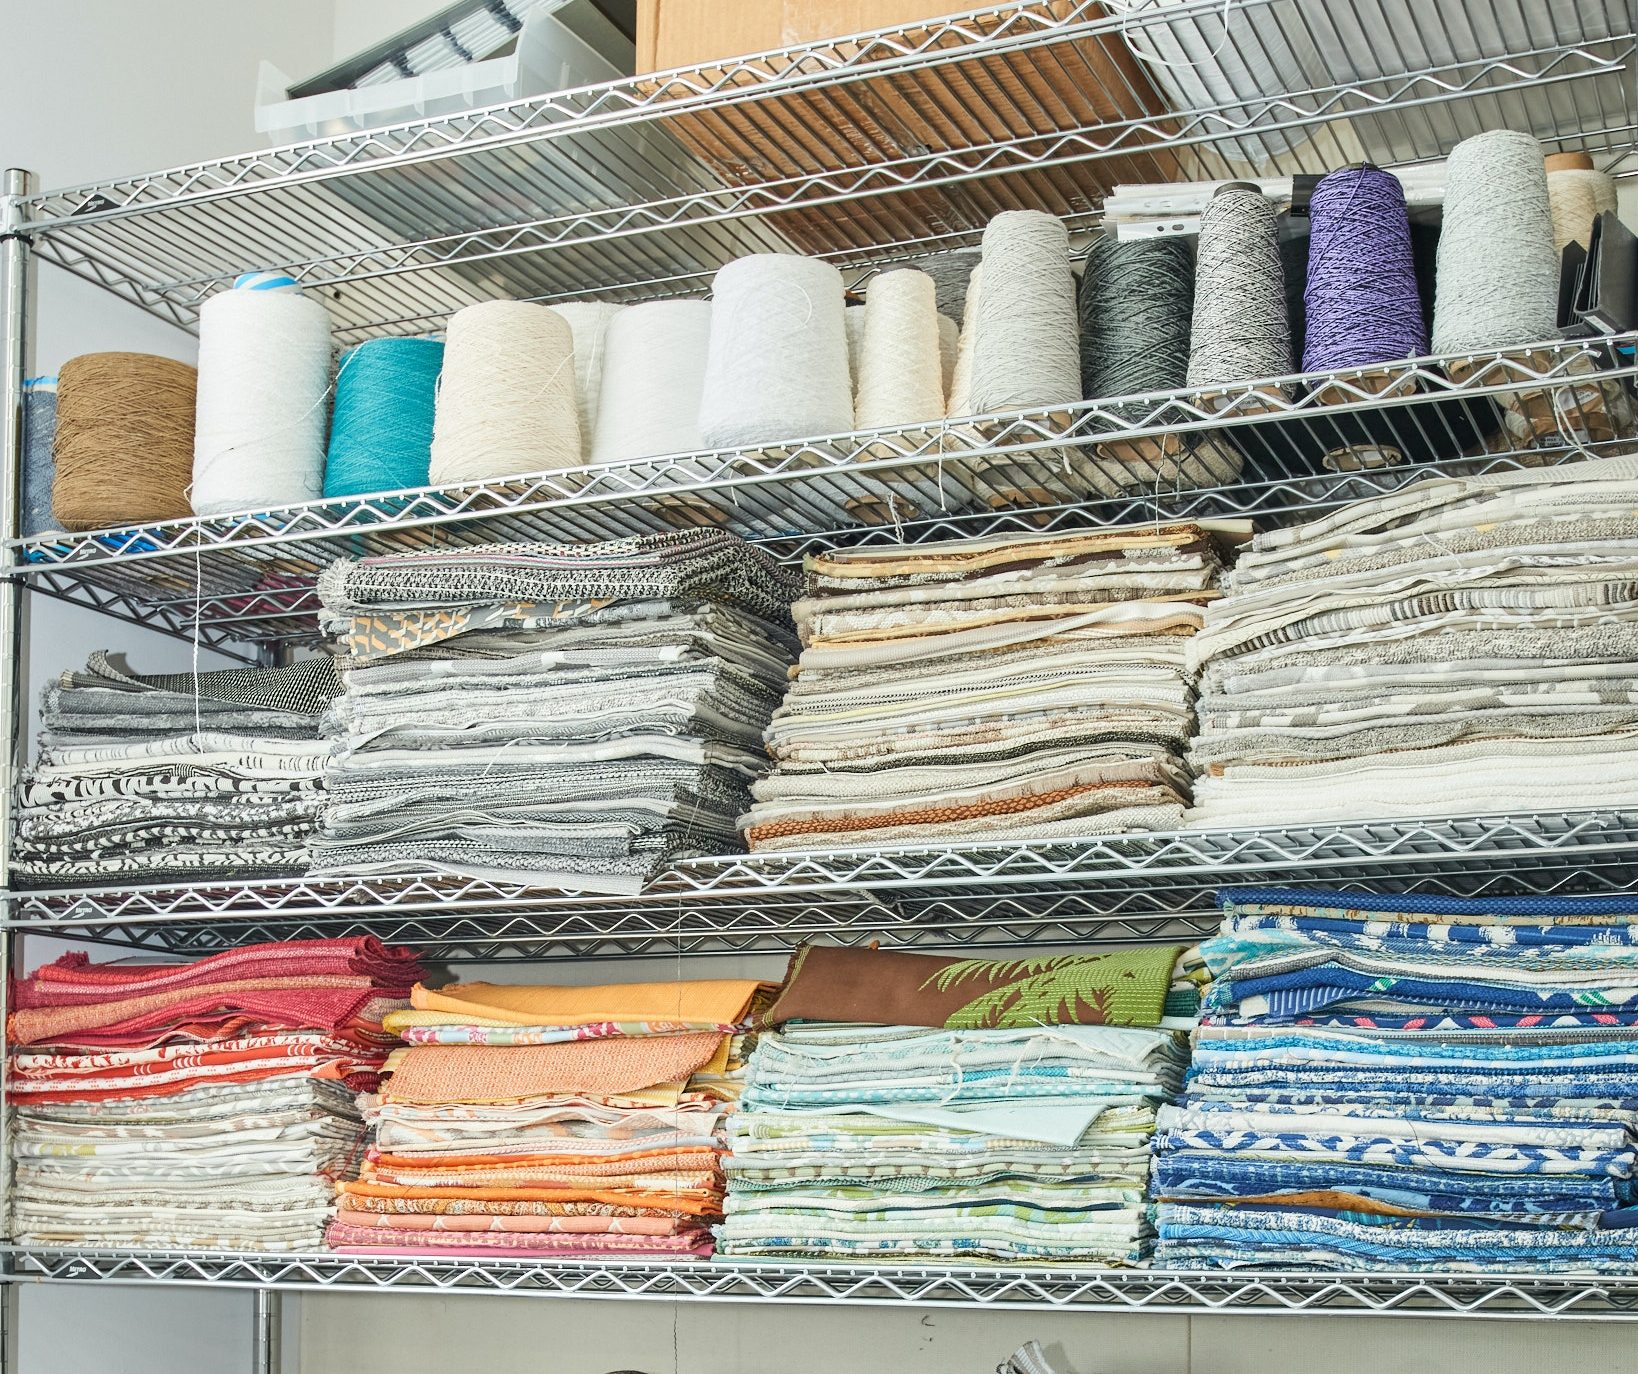 Swavelle fabrics and threads on a wire shelf